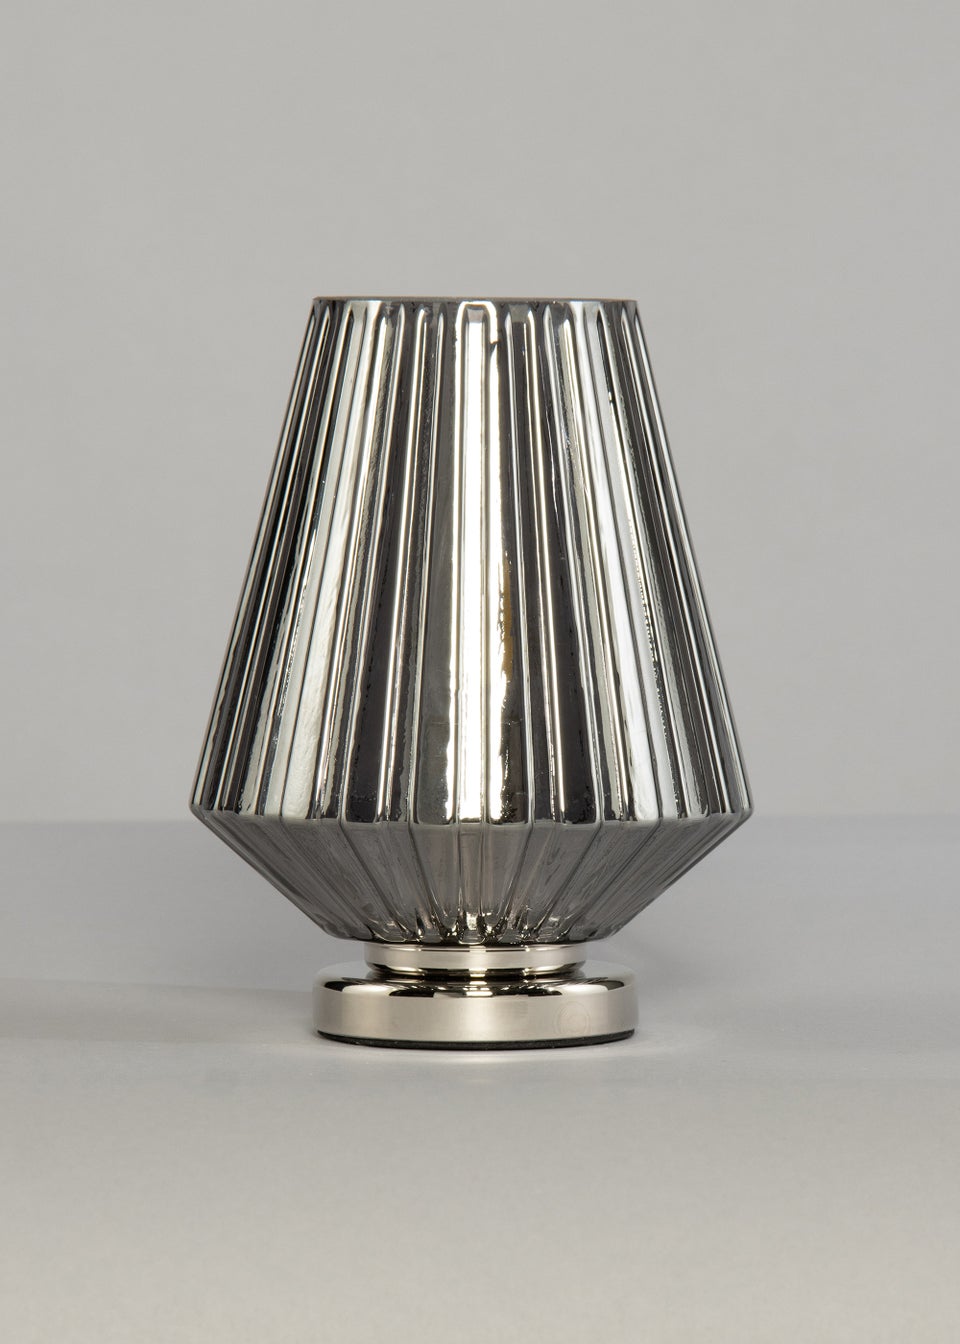 BHS Small Vessel Table Lamp